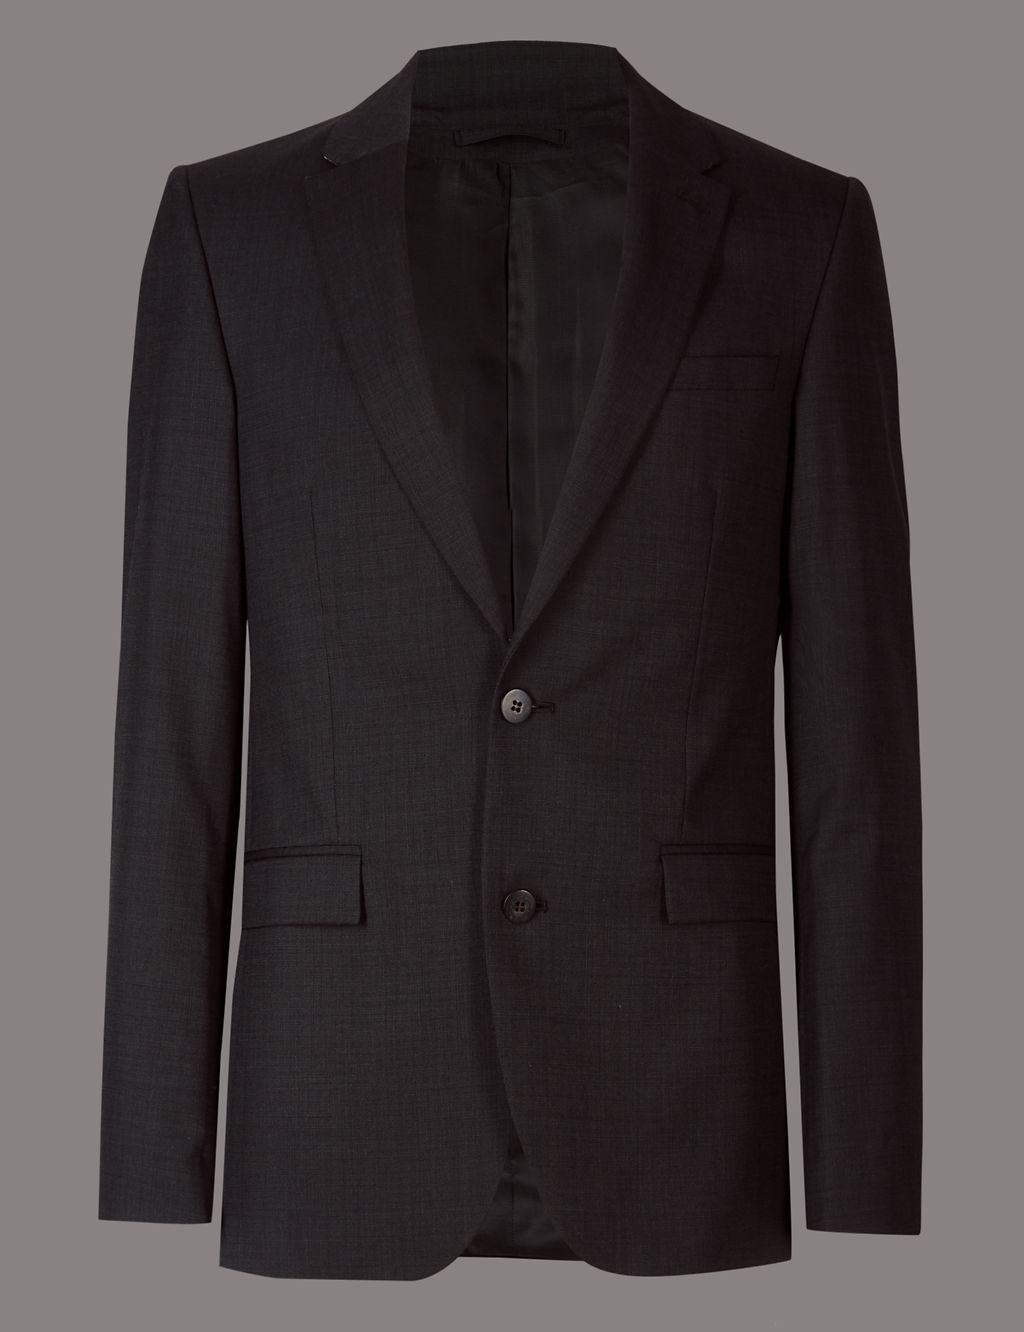 Charcoal Tailored Fit Italian Wool Jacket 1 of 8